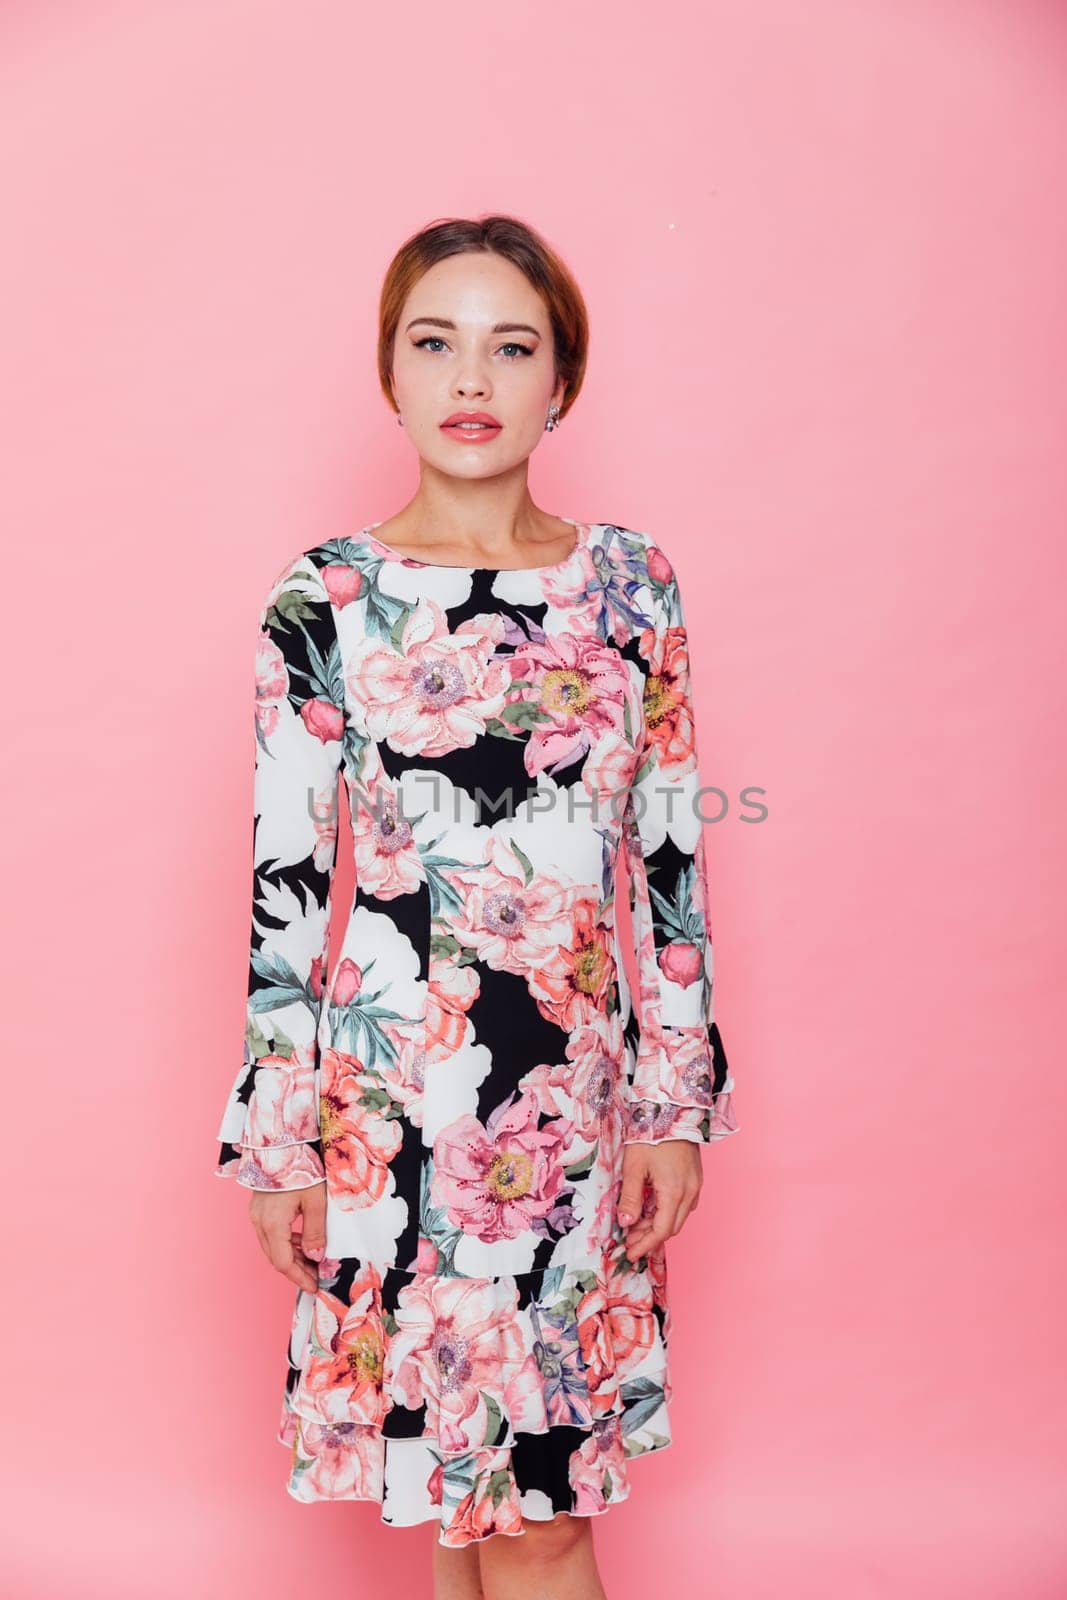 beautiful woman in a floral dress poses on a pink background